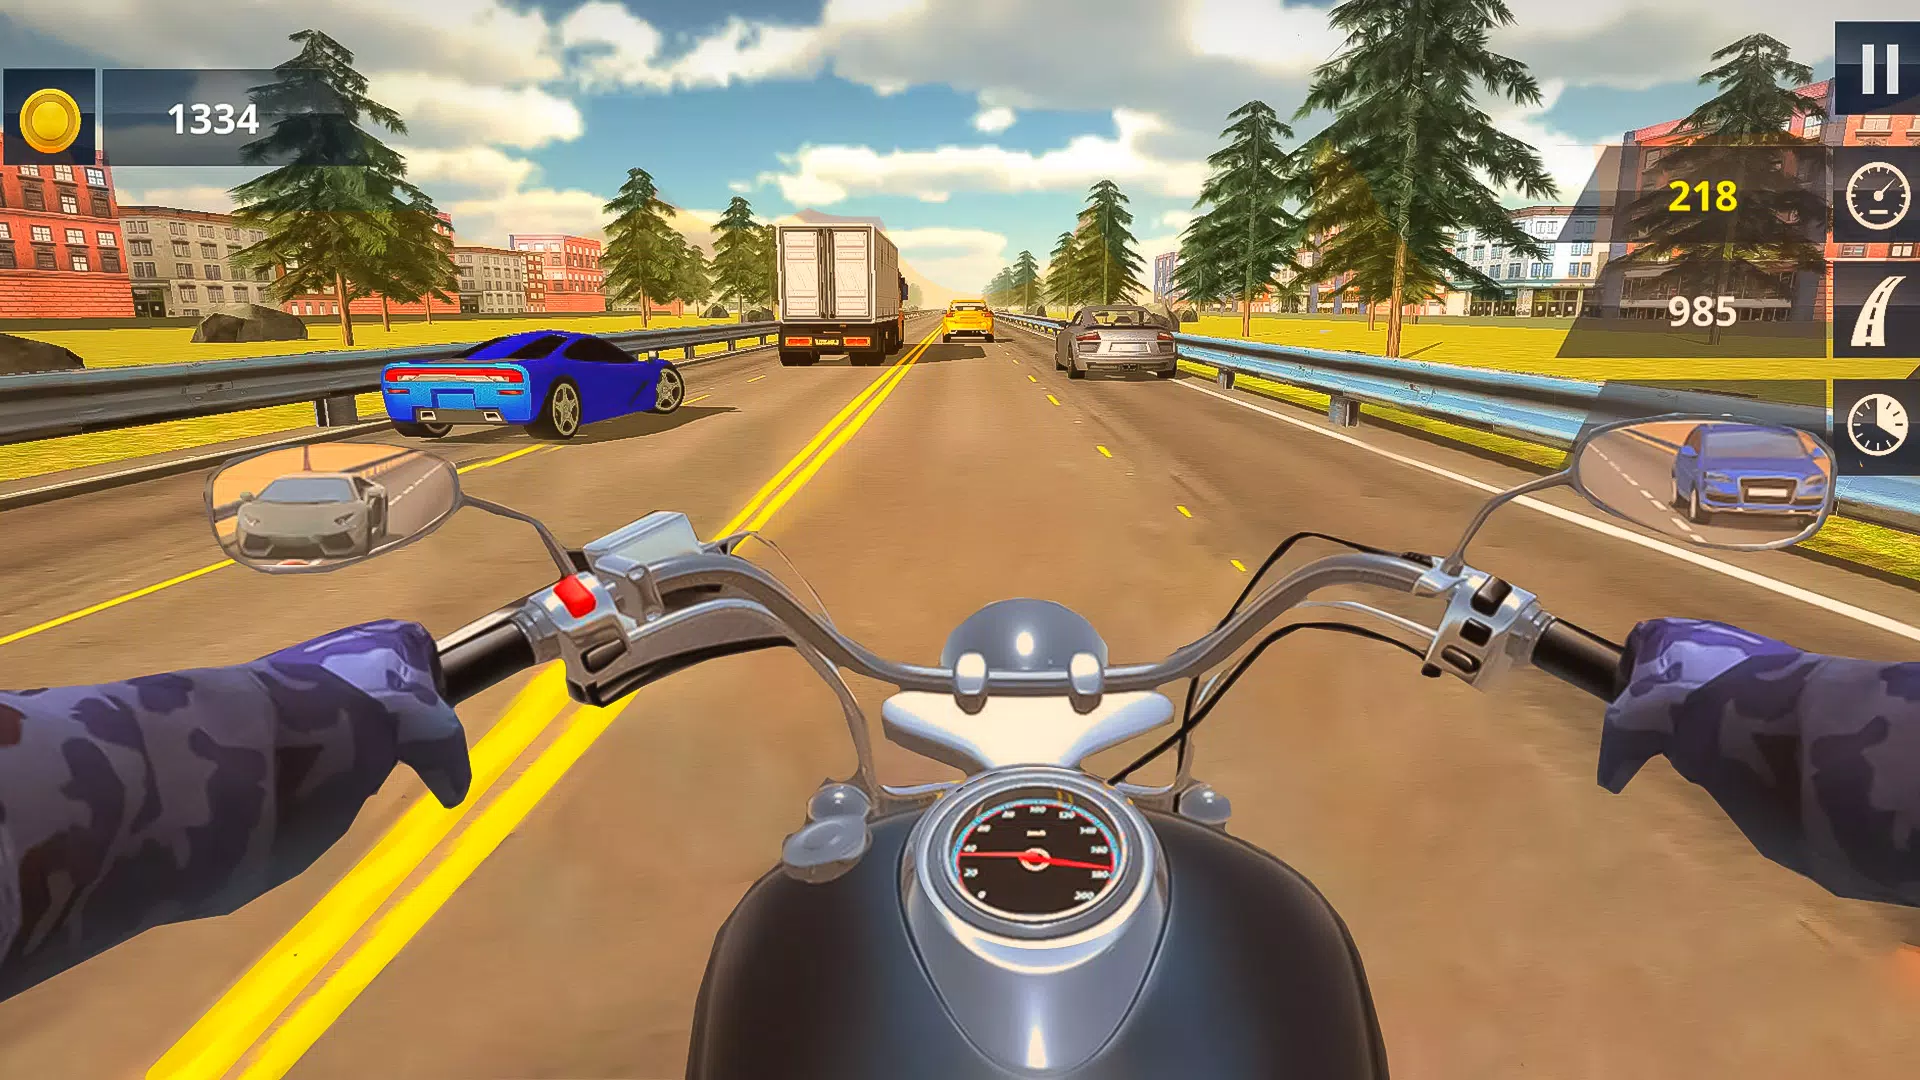 Traffic Bike Racing  Play Now Online for Free 